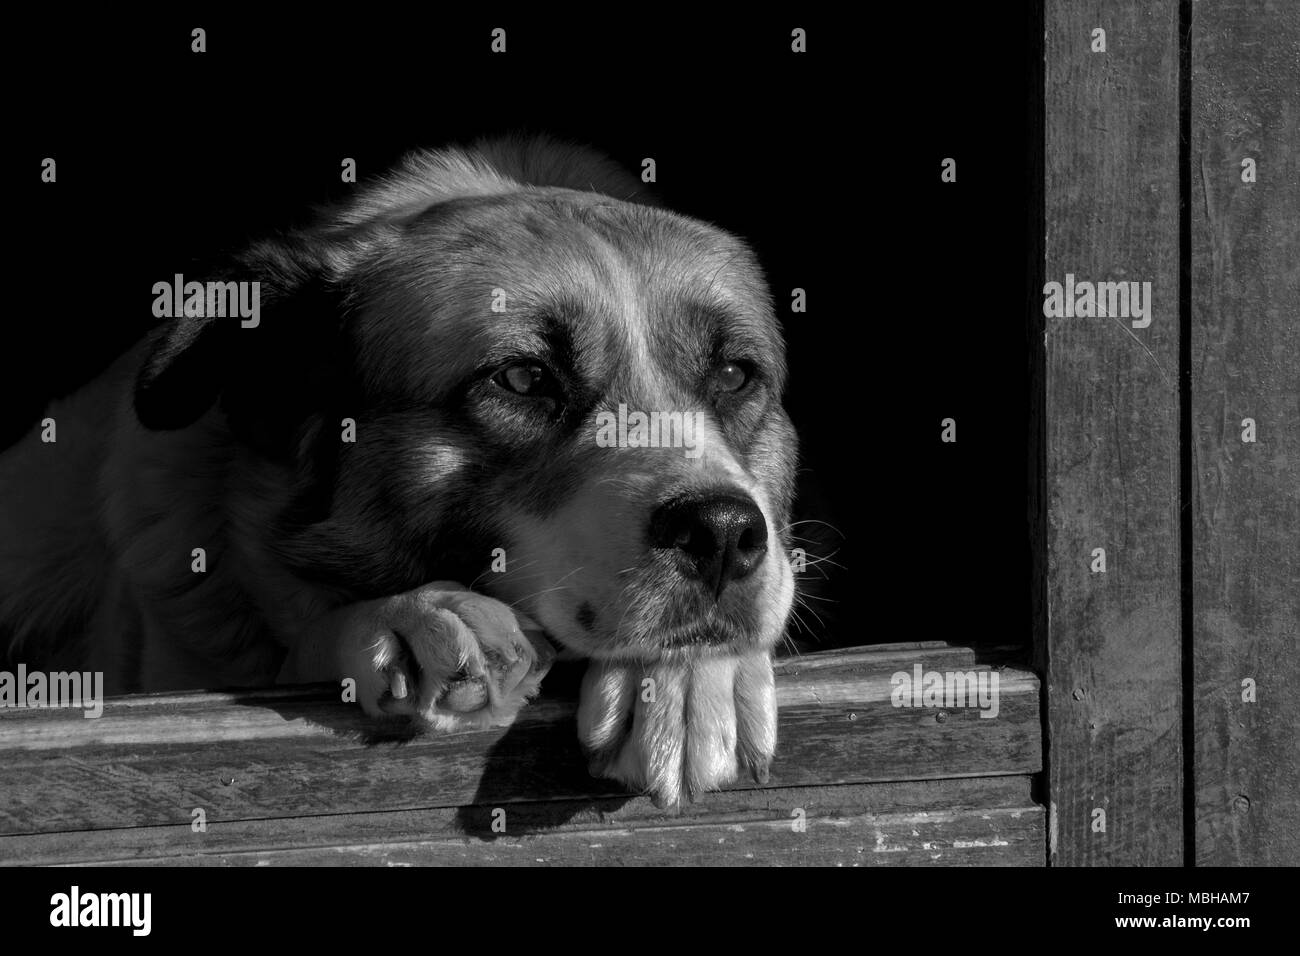 dog sitting in a dog house Stock Photo